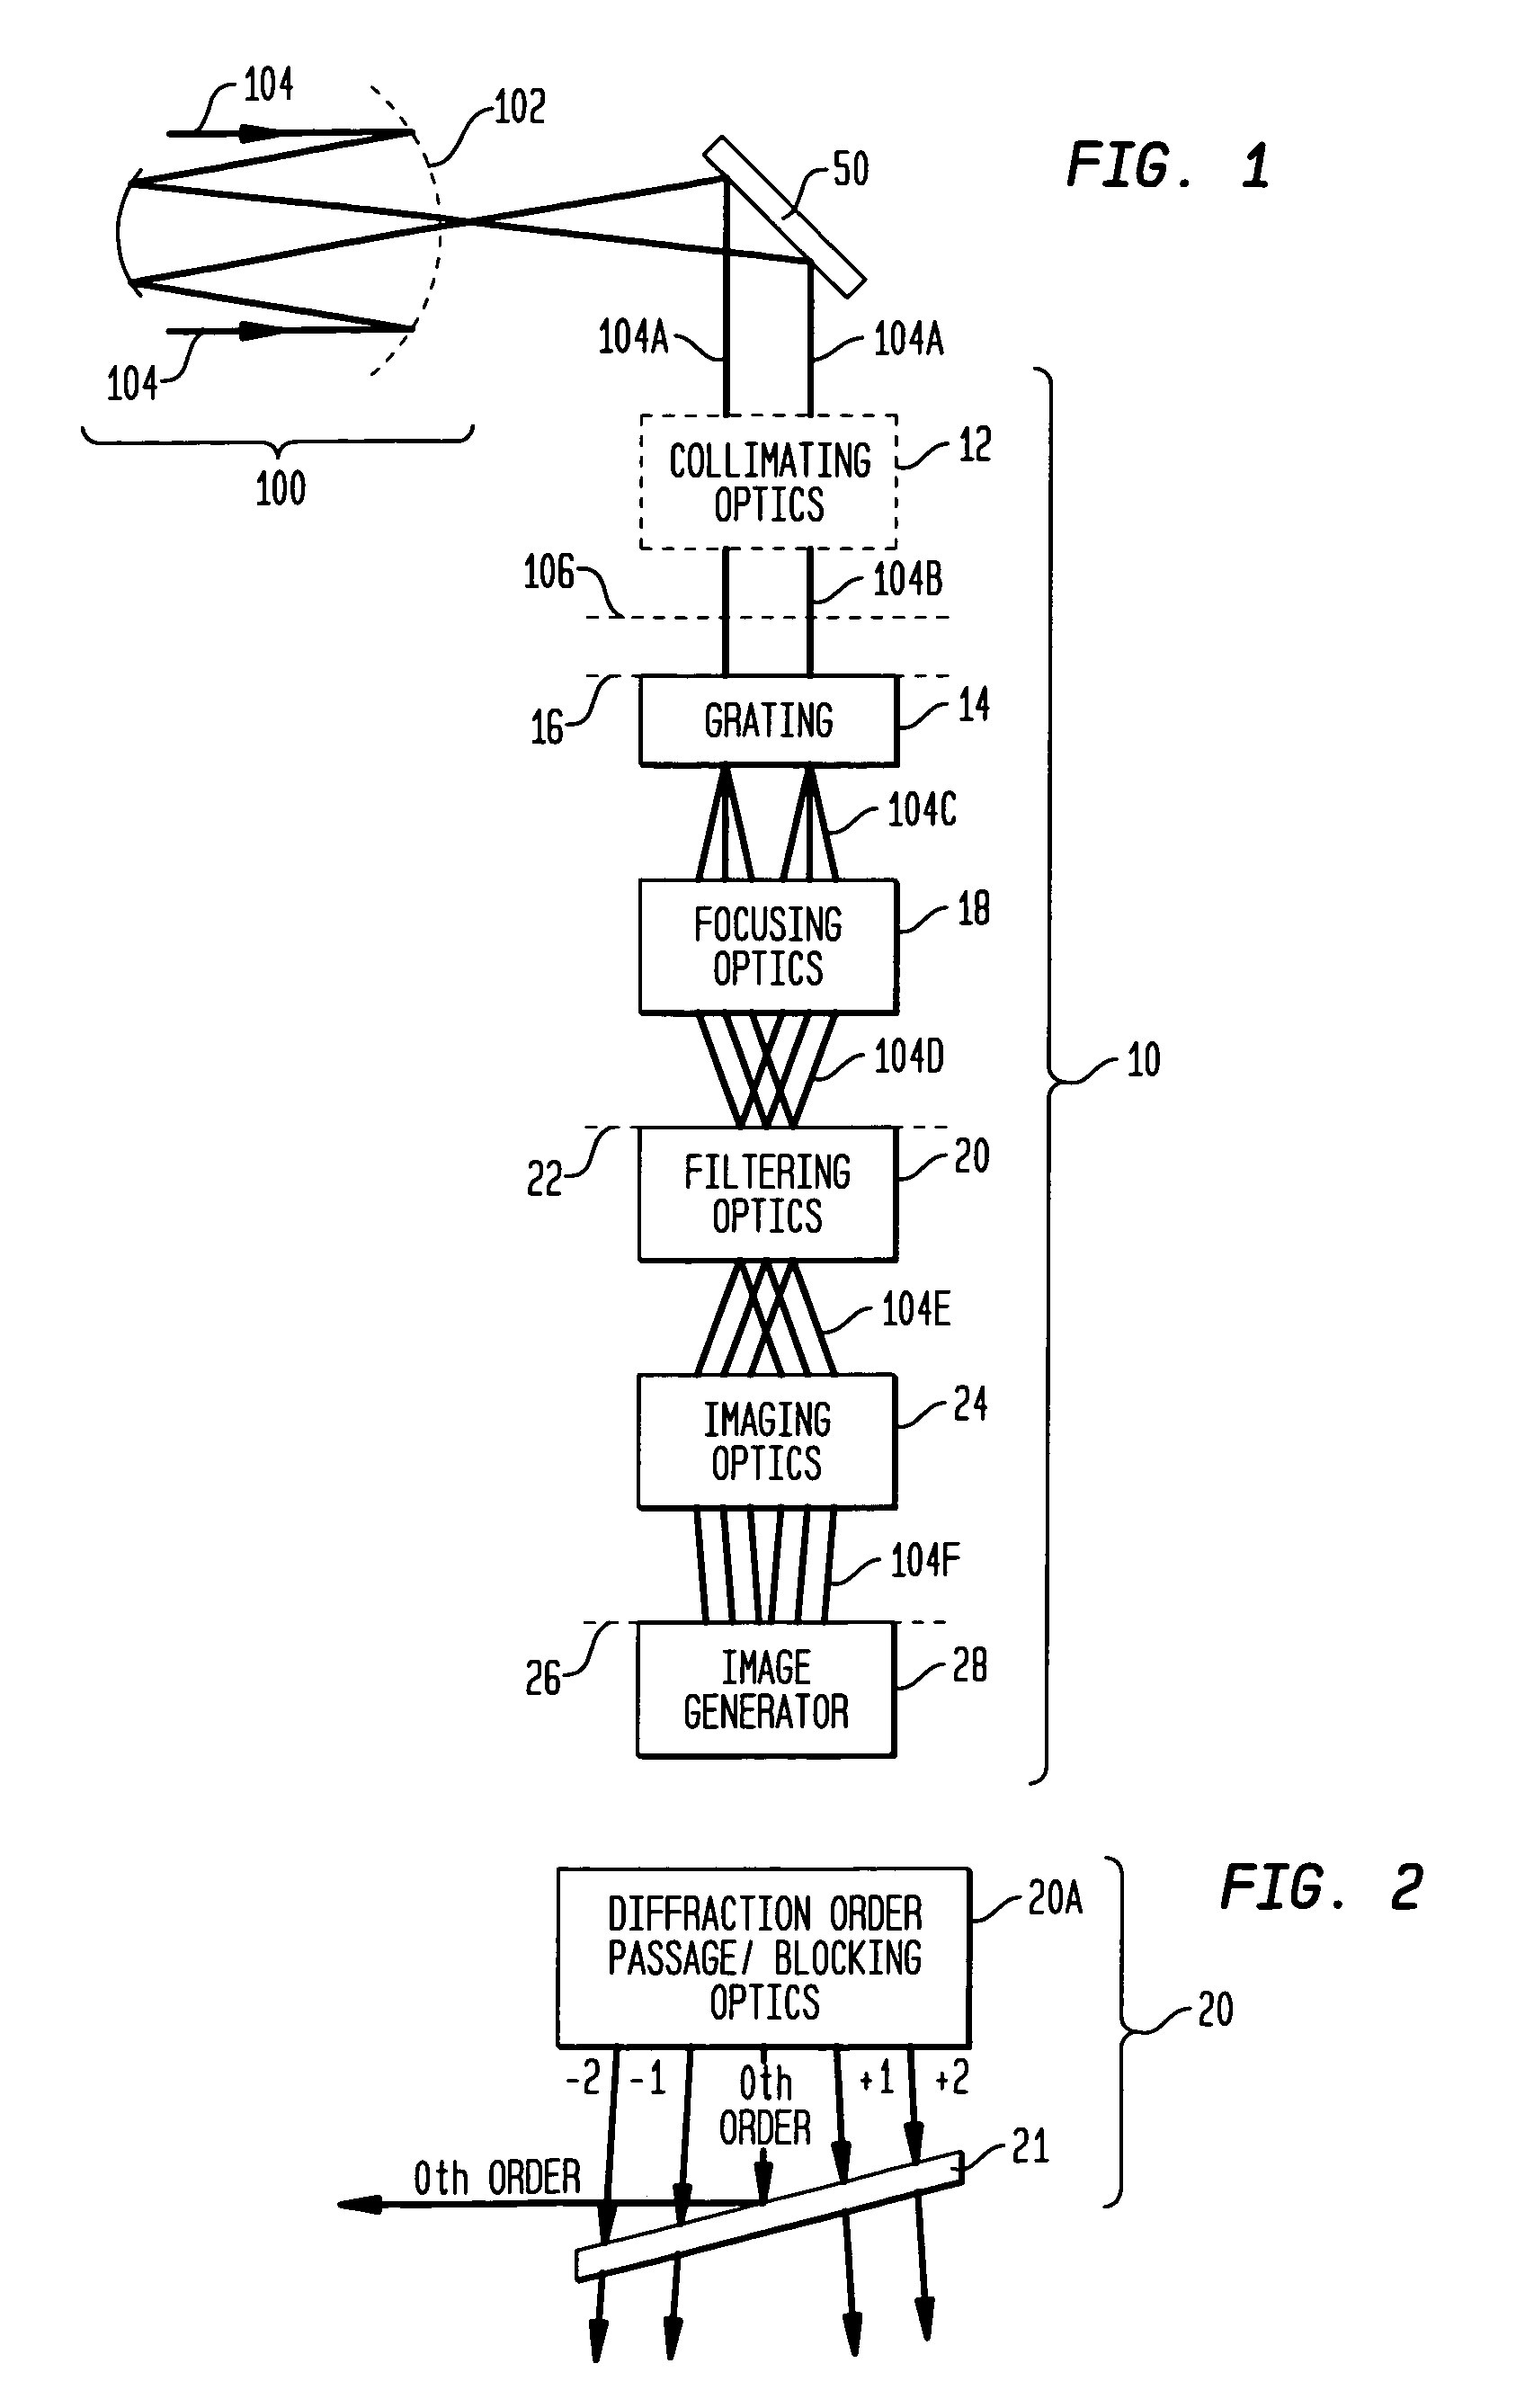 Achromatic shearing phase sensor for generating images indicative of measure(s) of alignment between segments of a segmented telescope's mirrors